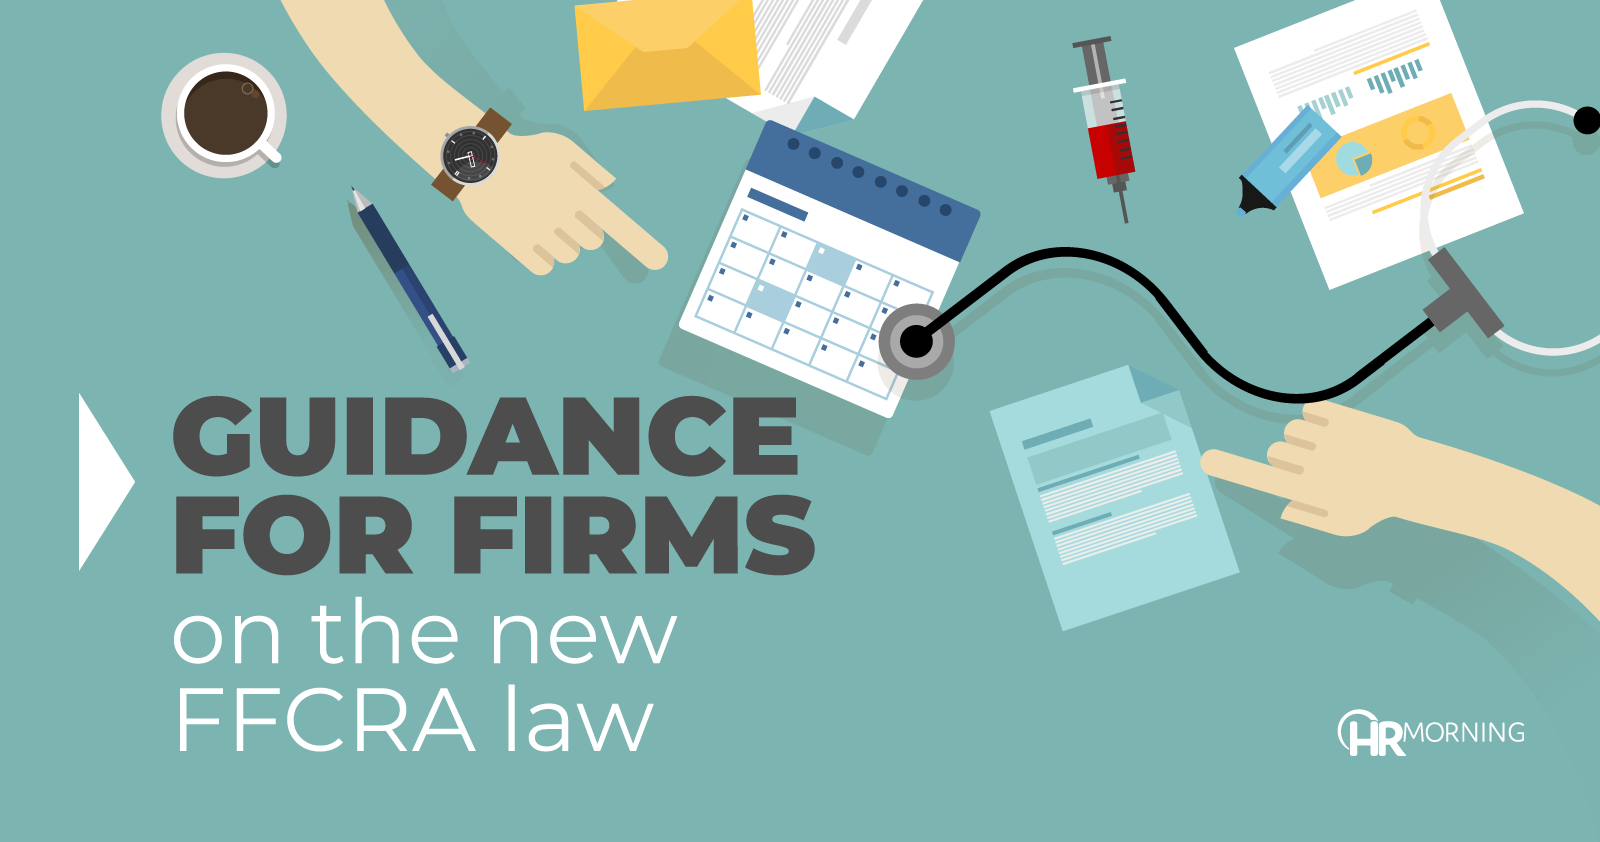 Guidance for firms on the new FFCRA law